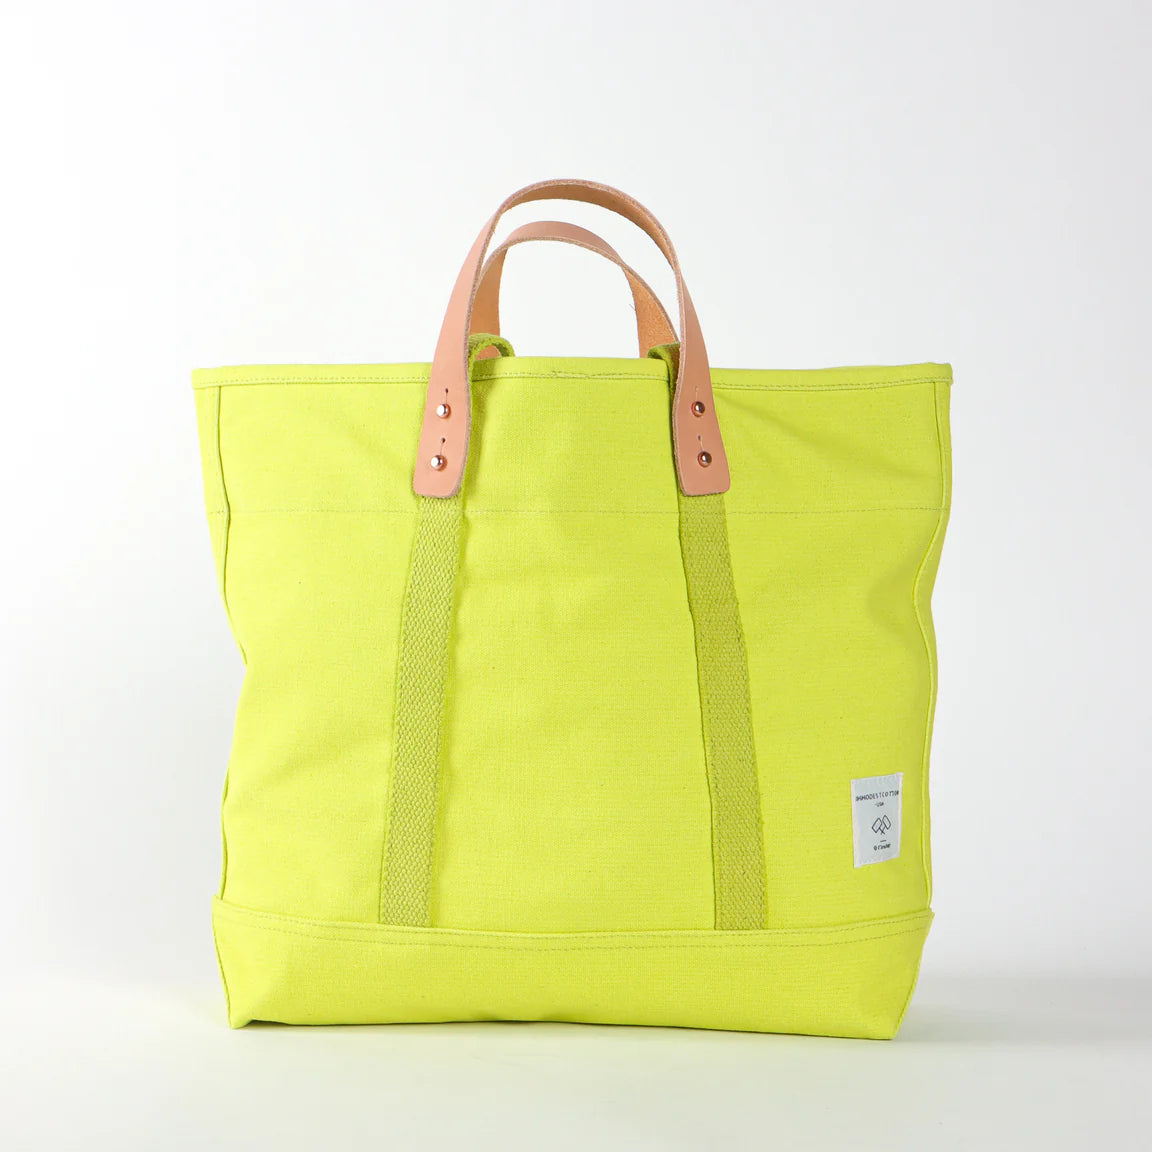 Immodest Cotton x High Noon | Small East West Tote in Lime